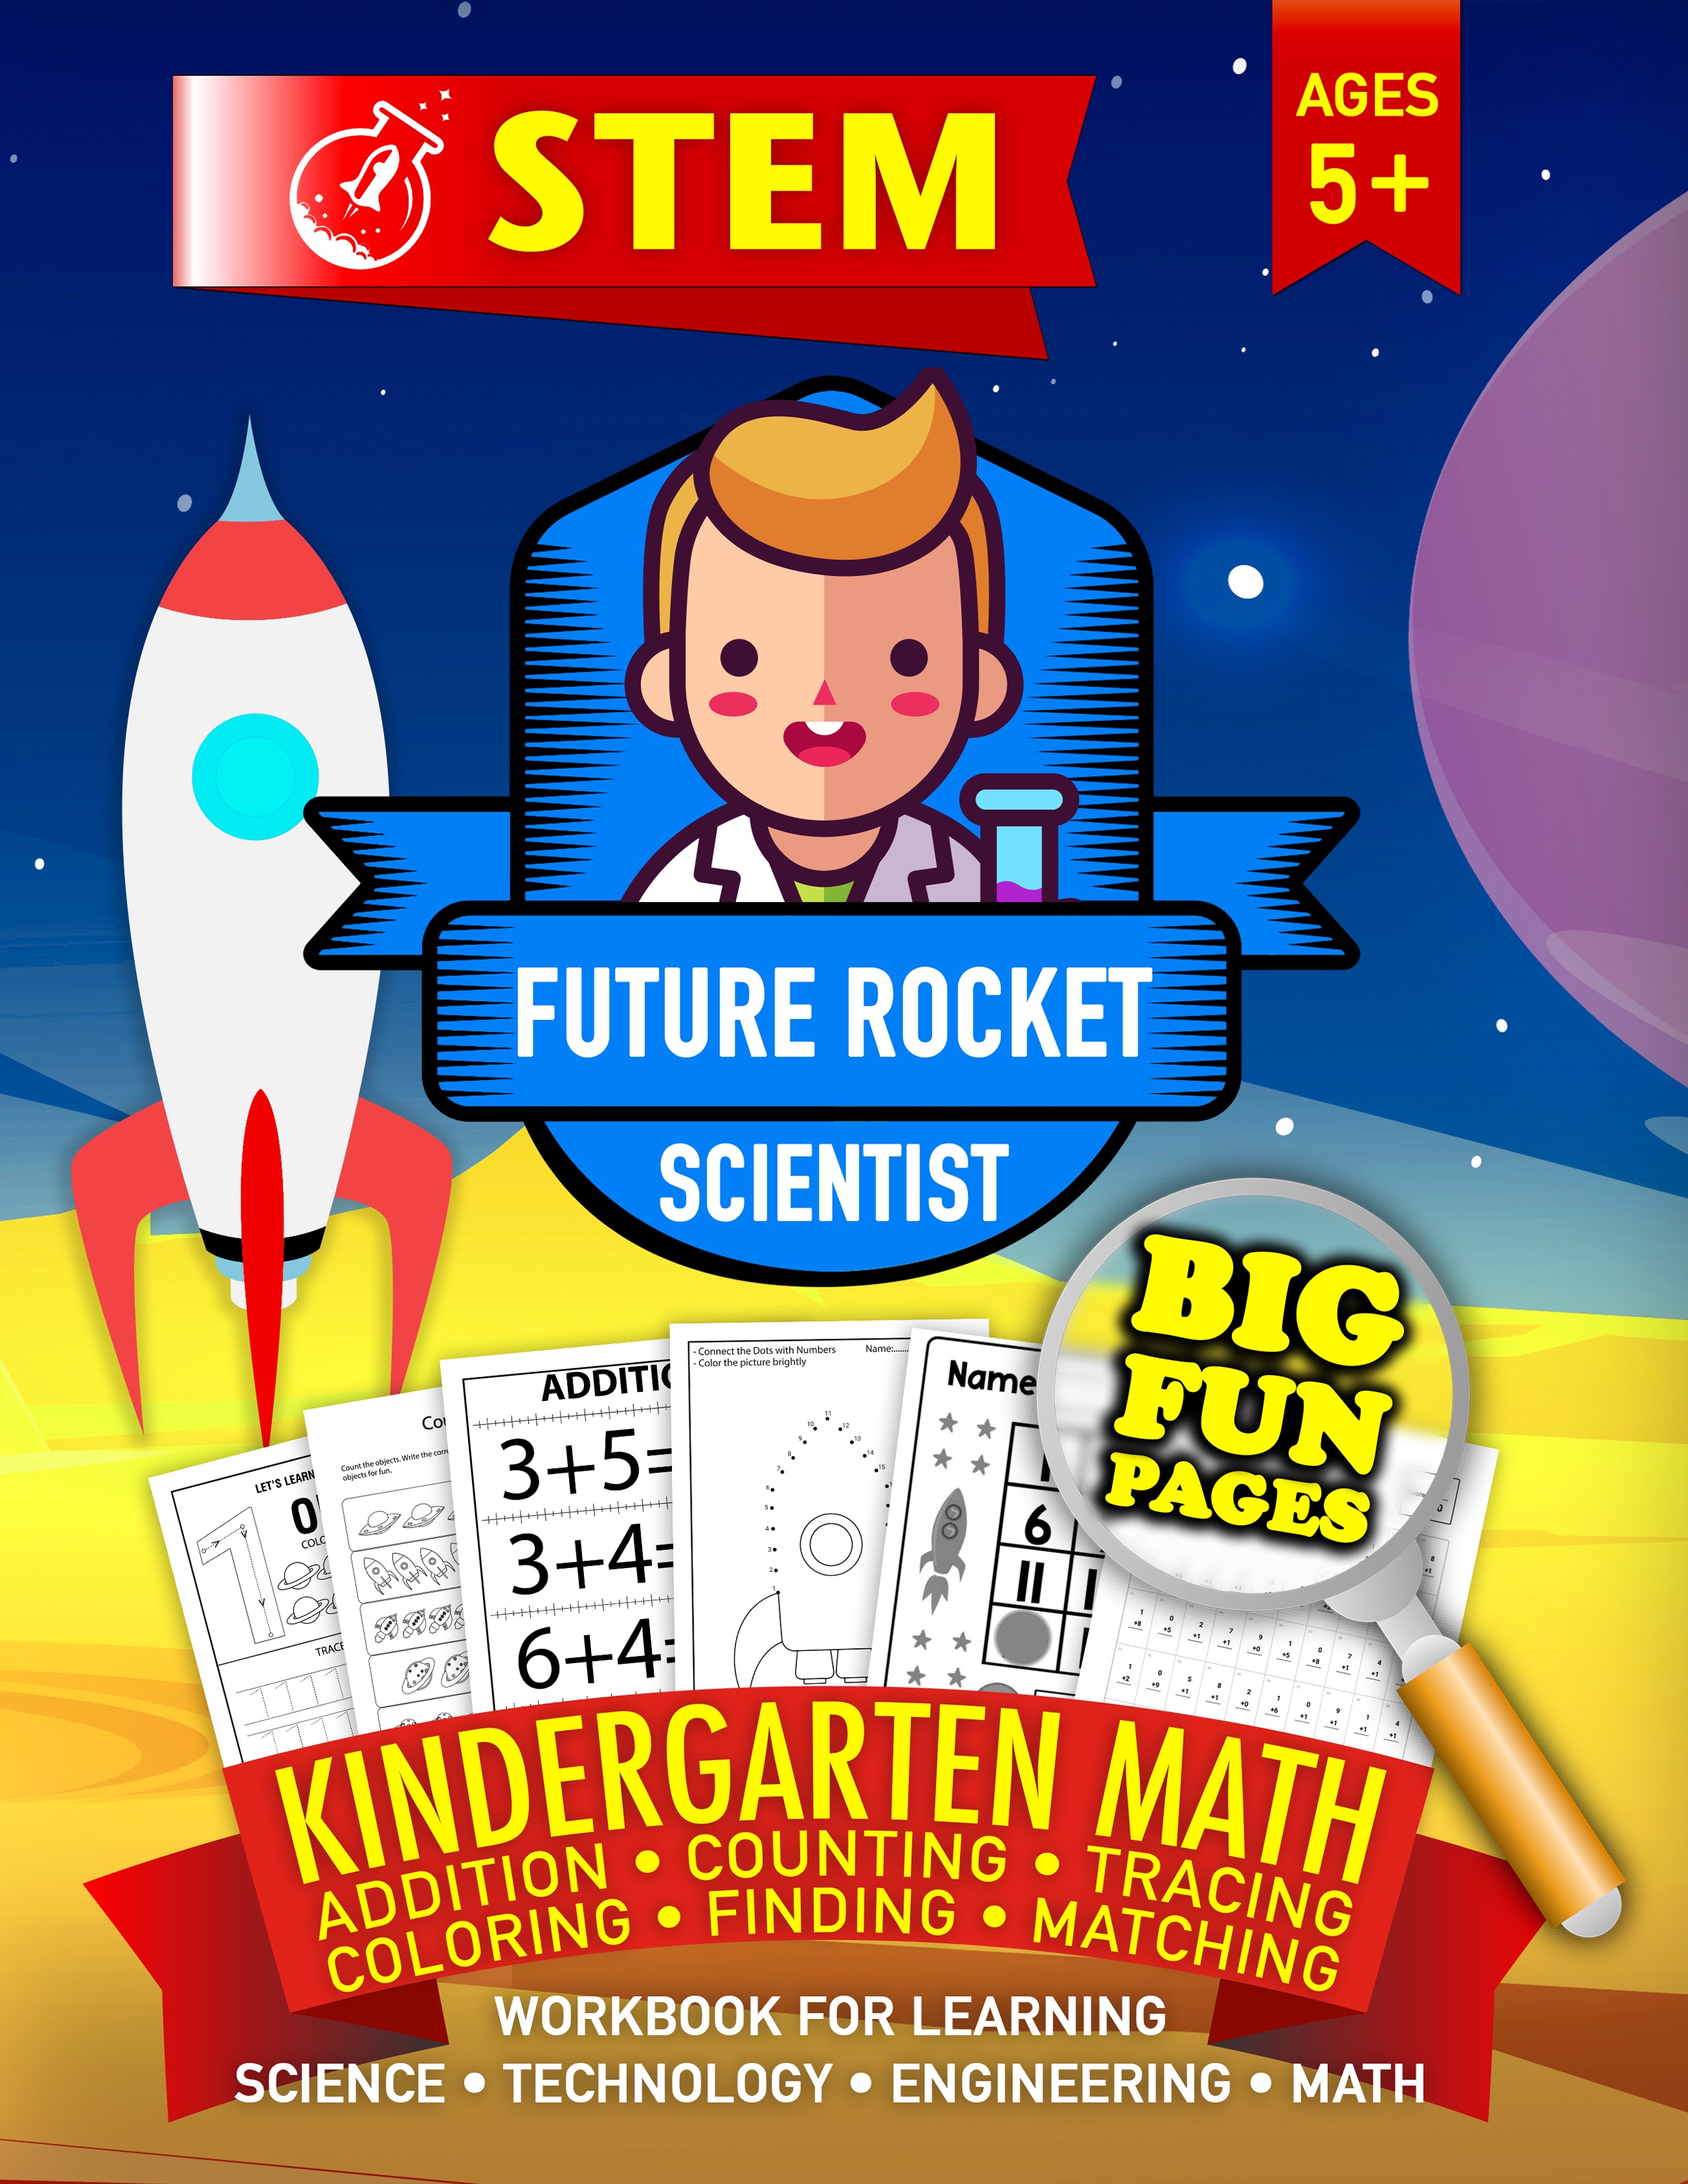 STEM Kindergarten Math Workbook • Addition • Counting • Tracing • Coloring • Finding • Matching: Space Science Technology Engineering Mathematics Ages 5+